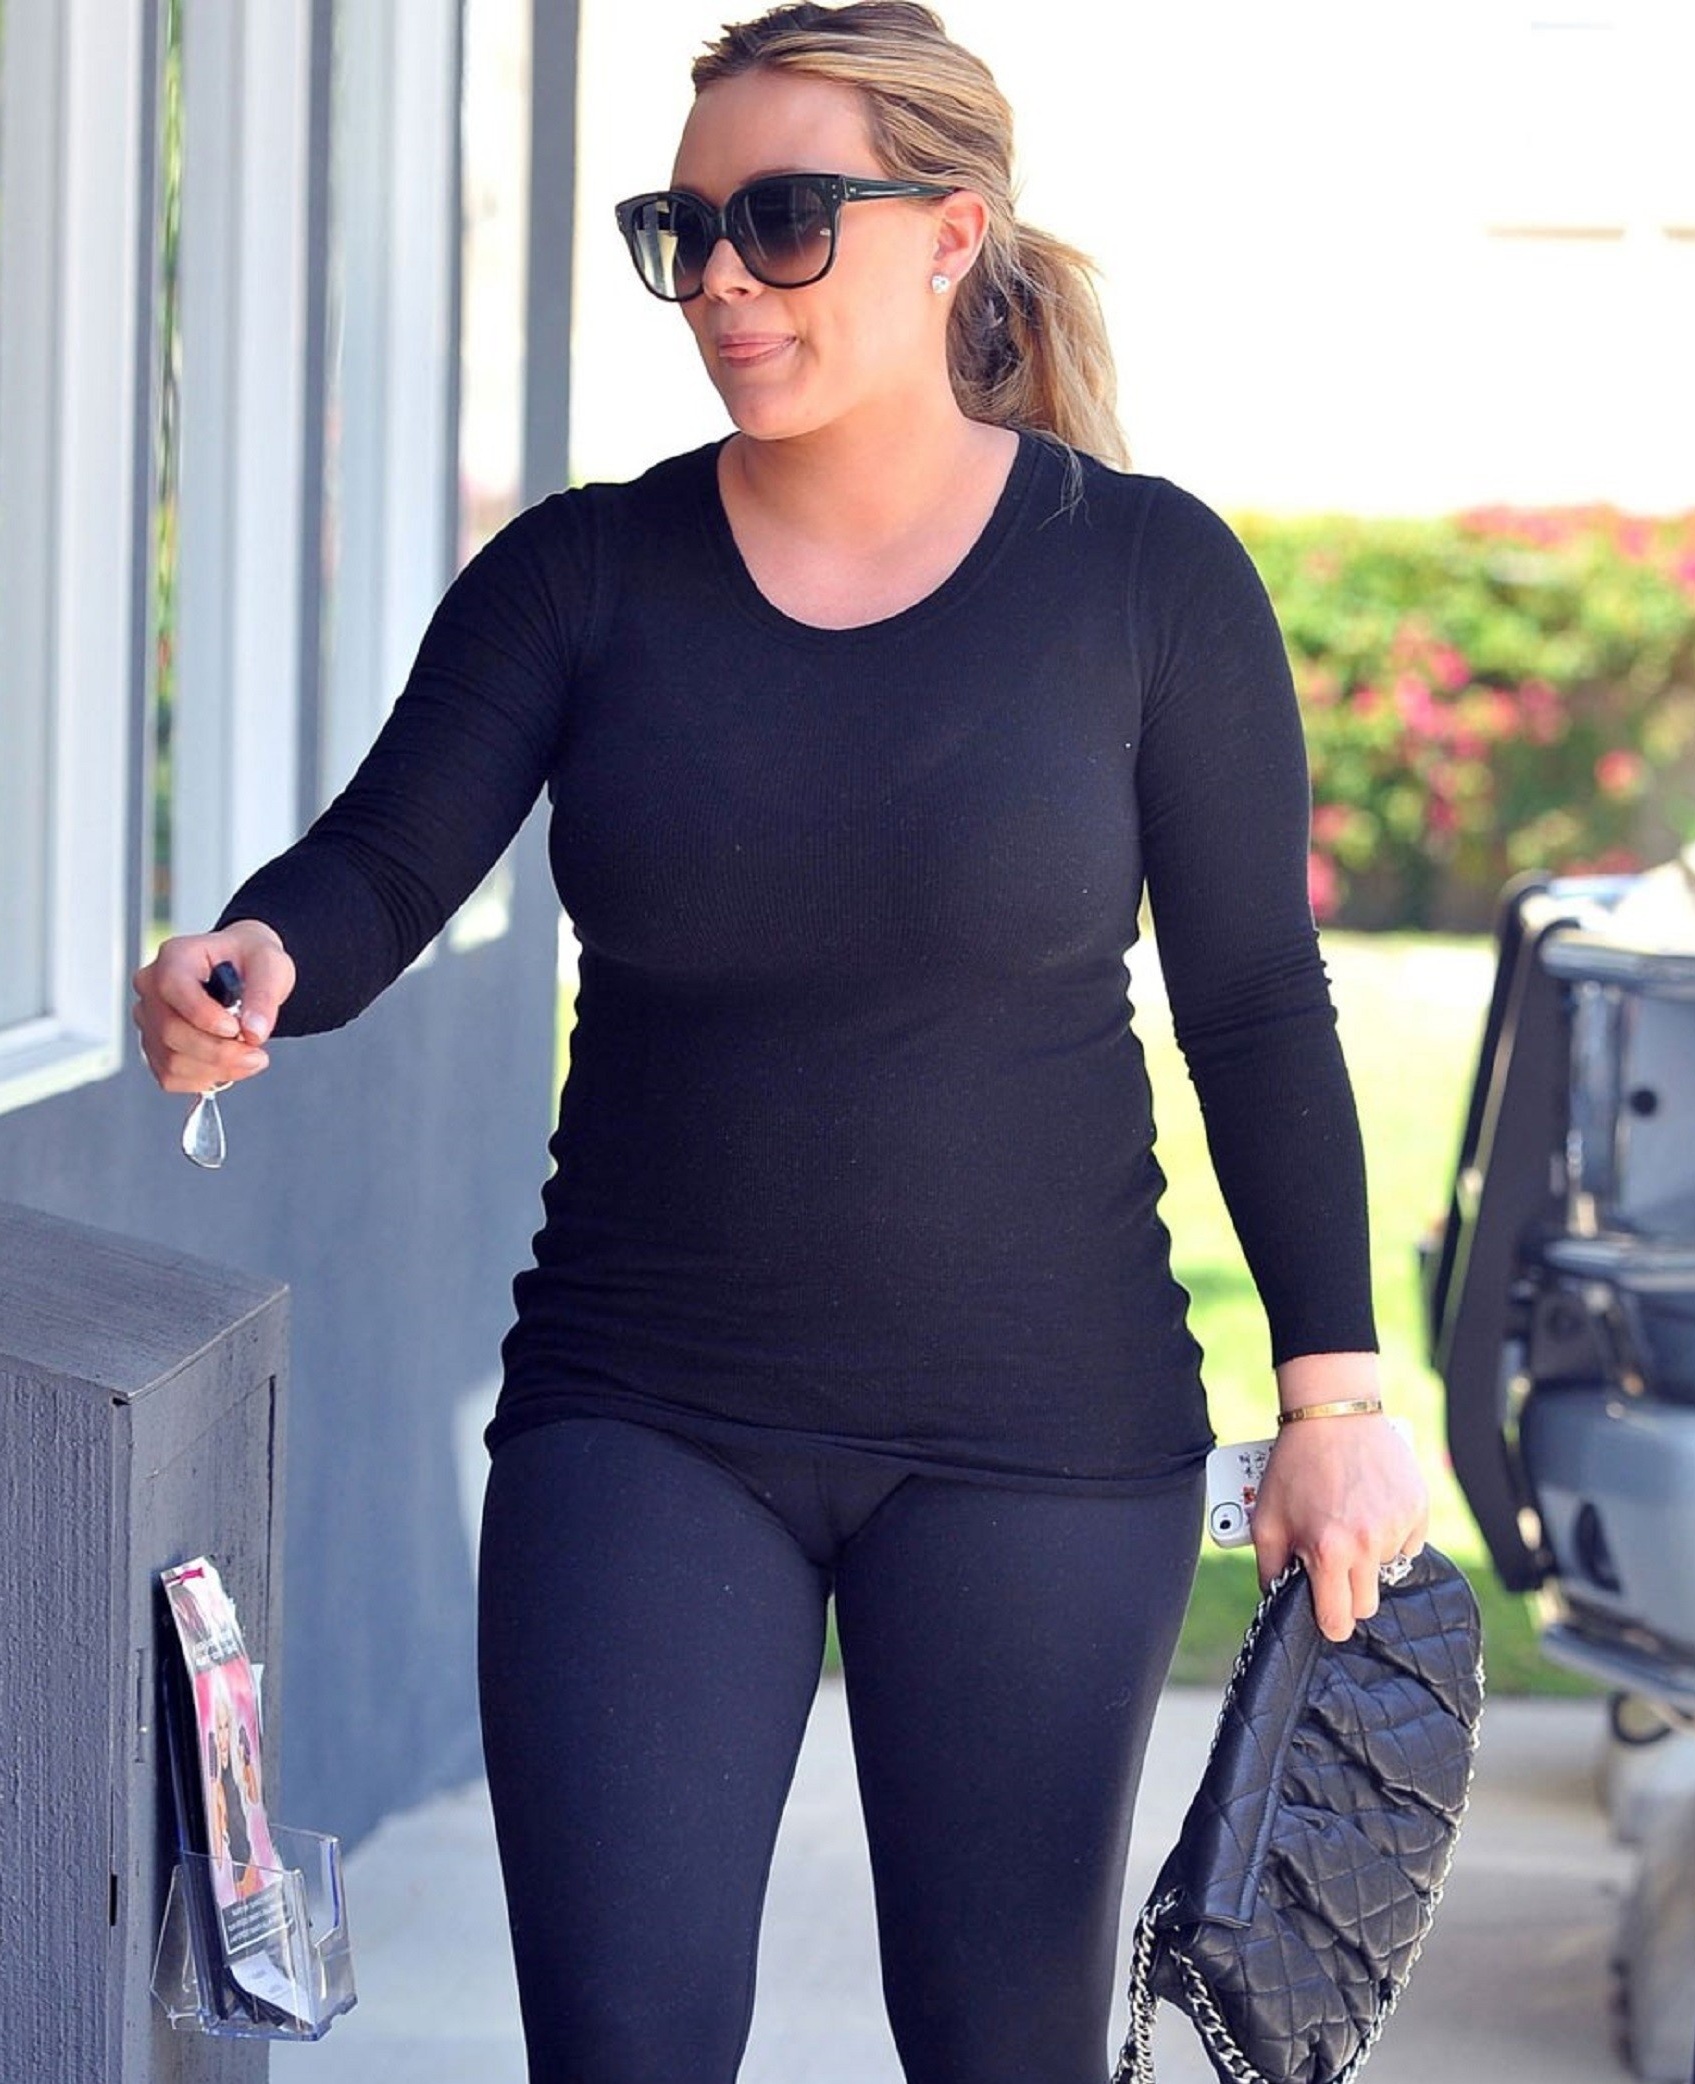 Hillary Duff wearing a tight black top and black yoga pants with visible ca...